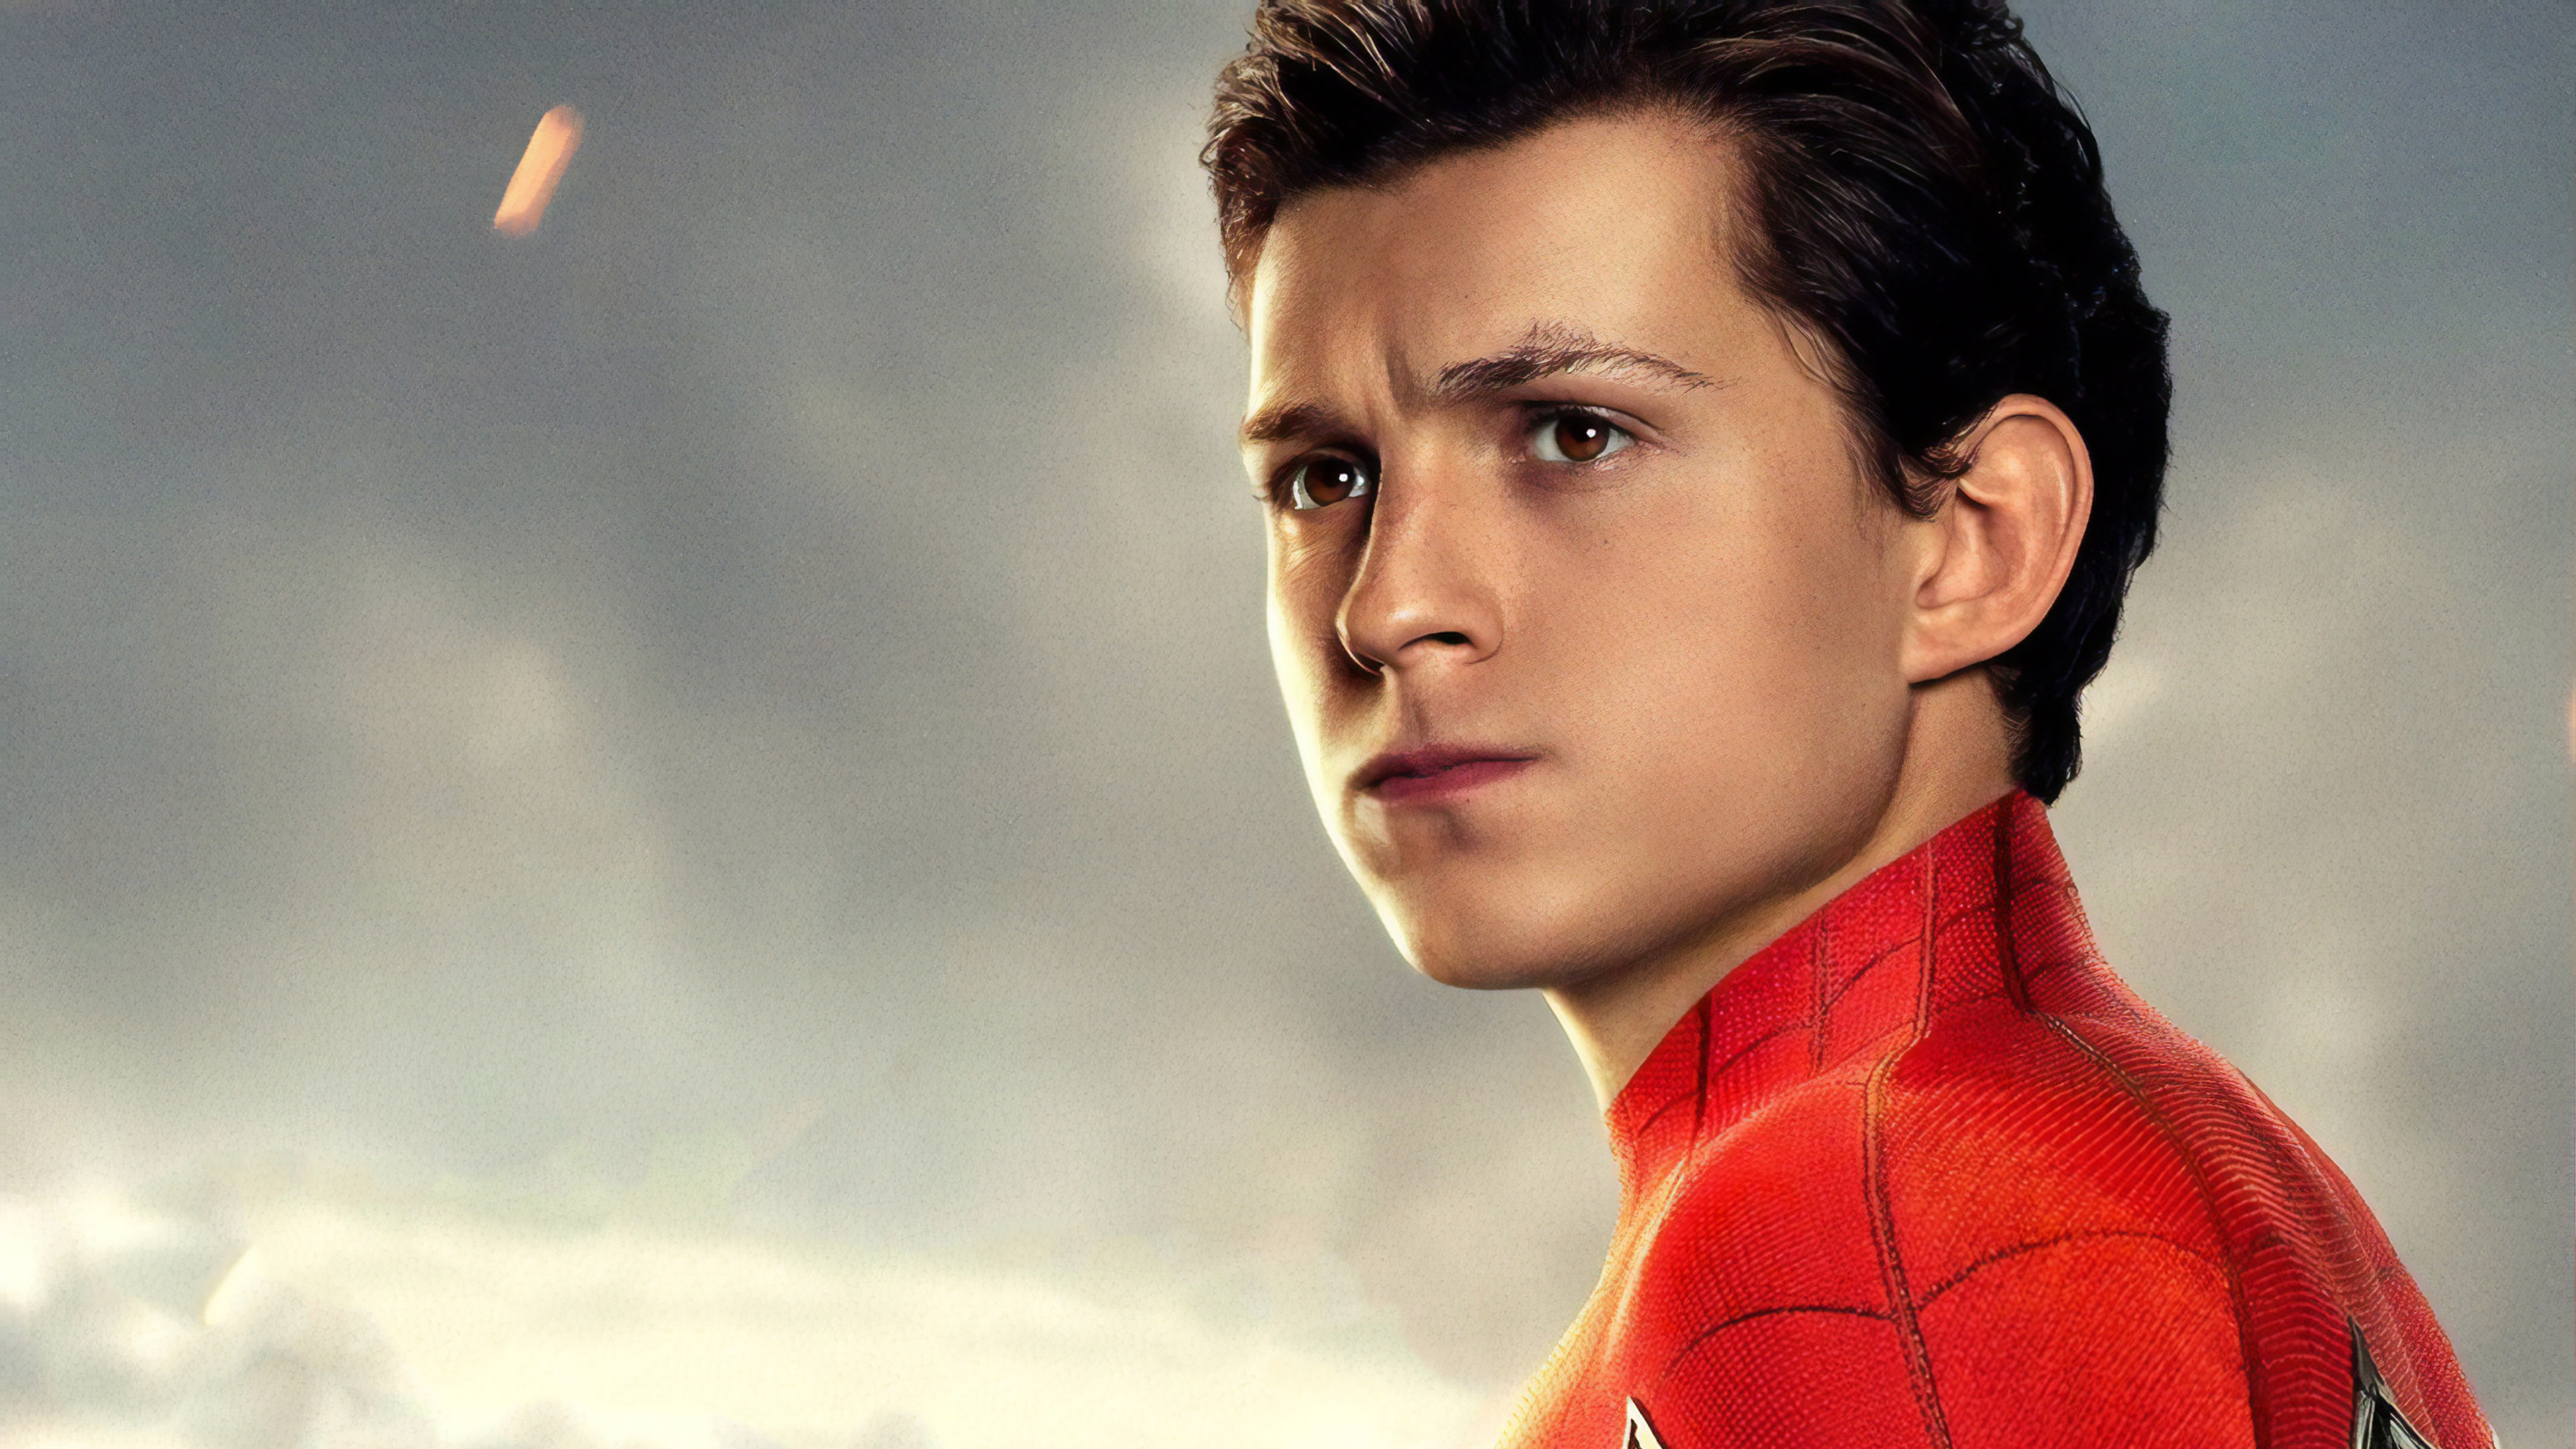 Tom Holland as Peter Parker, Spider Man: Far From Home, Movie poster, High-quality images, 3840x2160 4K Desktop